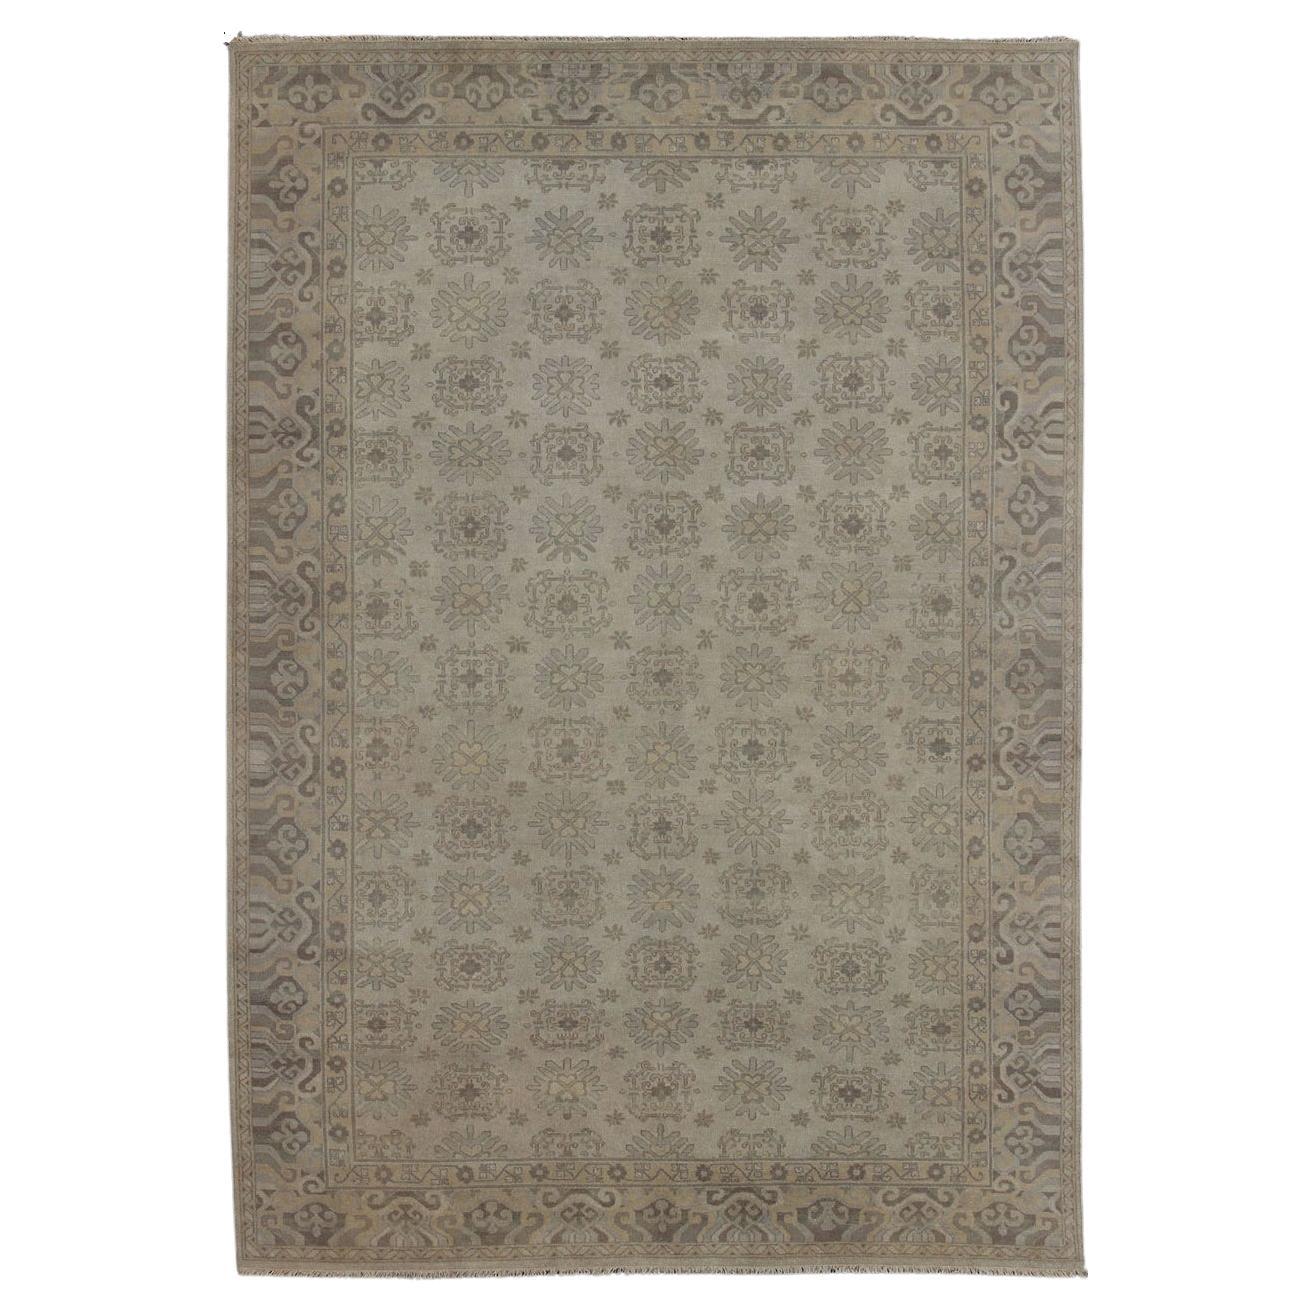   Keivan Woven Arts Hand Knotted Khotan Wool Rug With Sub-Geometric Design For Sale